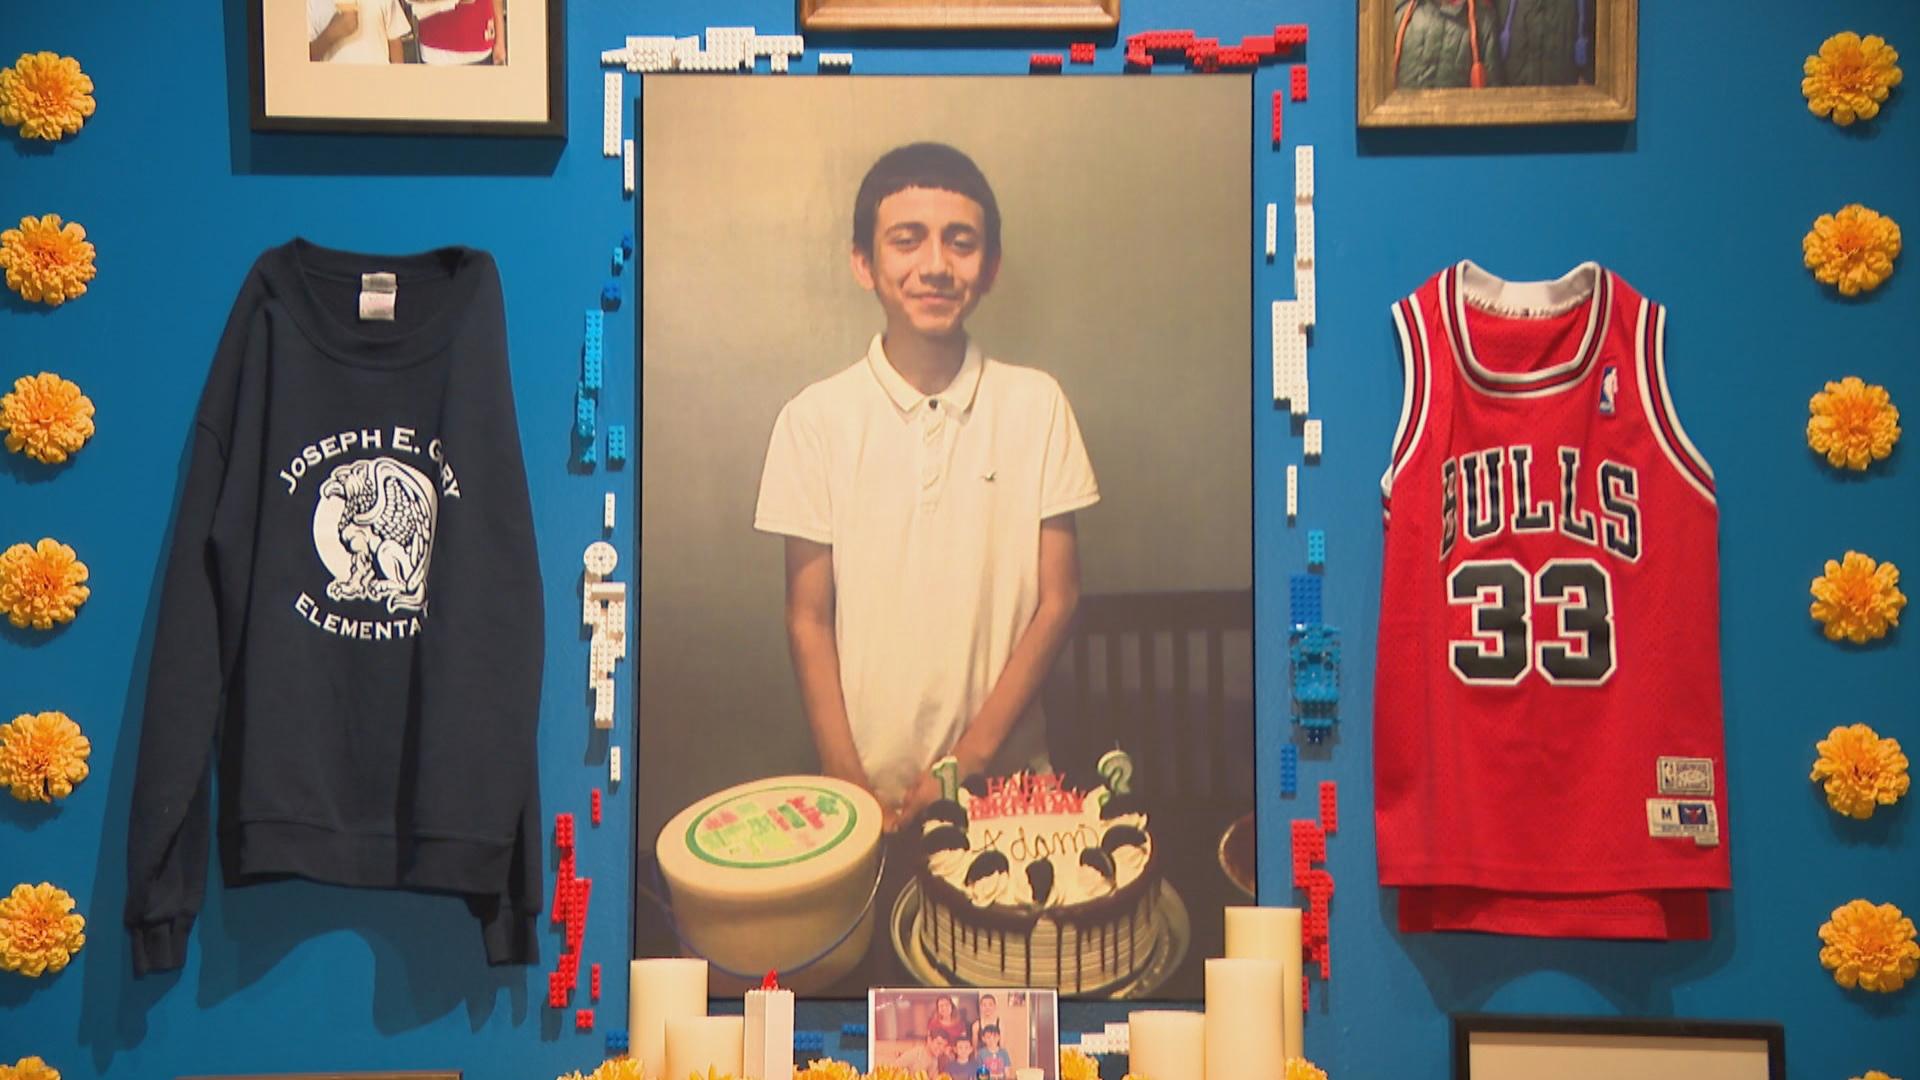 An ofrenda in memory of 13-year-old Adam Toledo who was fatally shot by Chicago police earlier this year. (WTTW News)